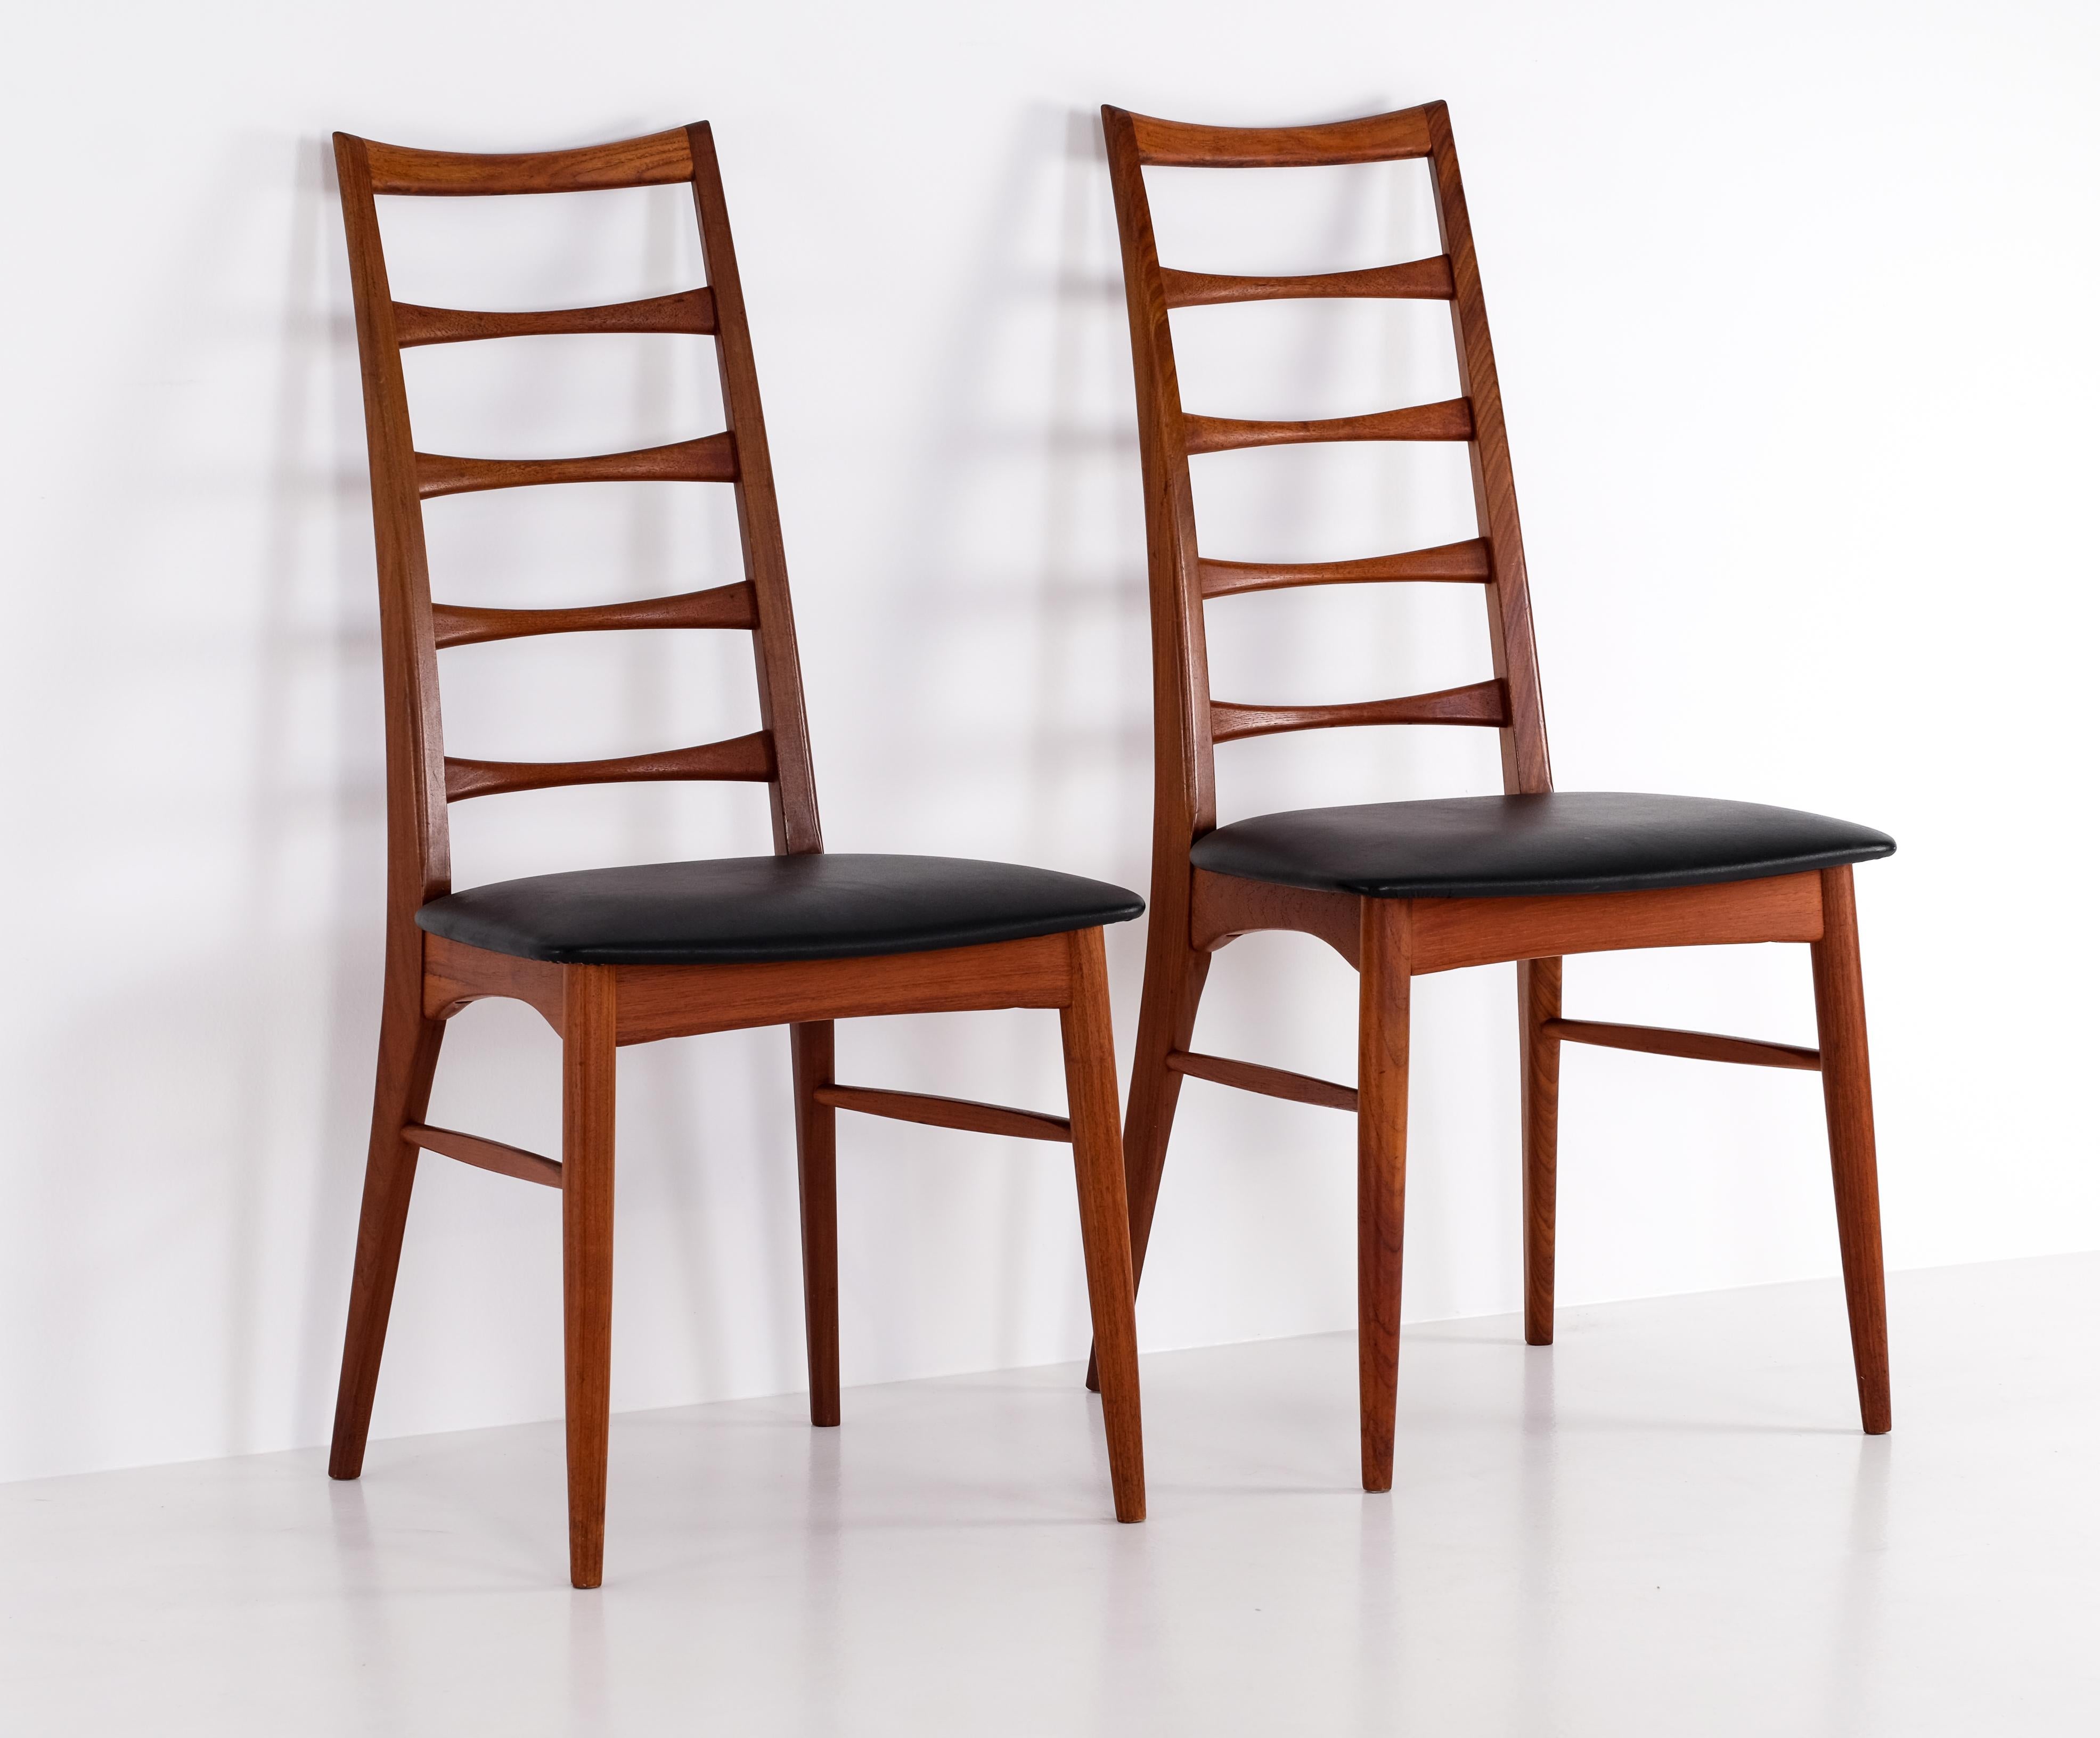 Set of 6 'Lis' chairs by Niels Koefoed, Denmark, 1960s For Sale 2